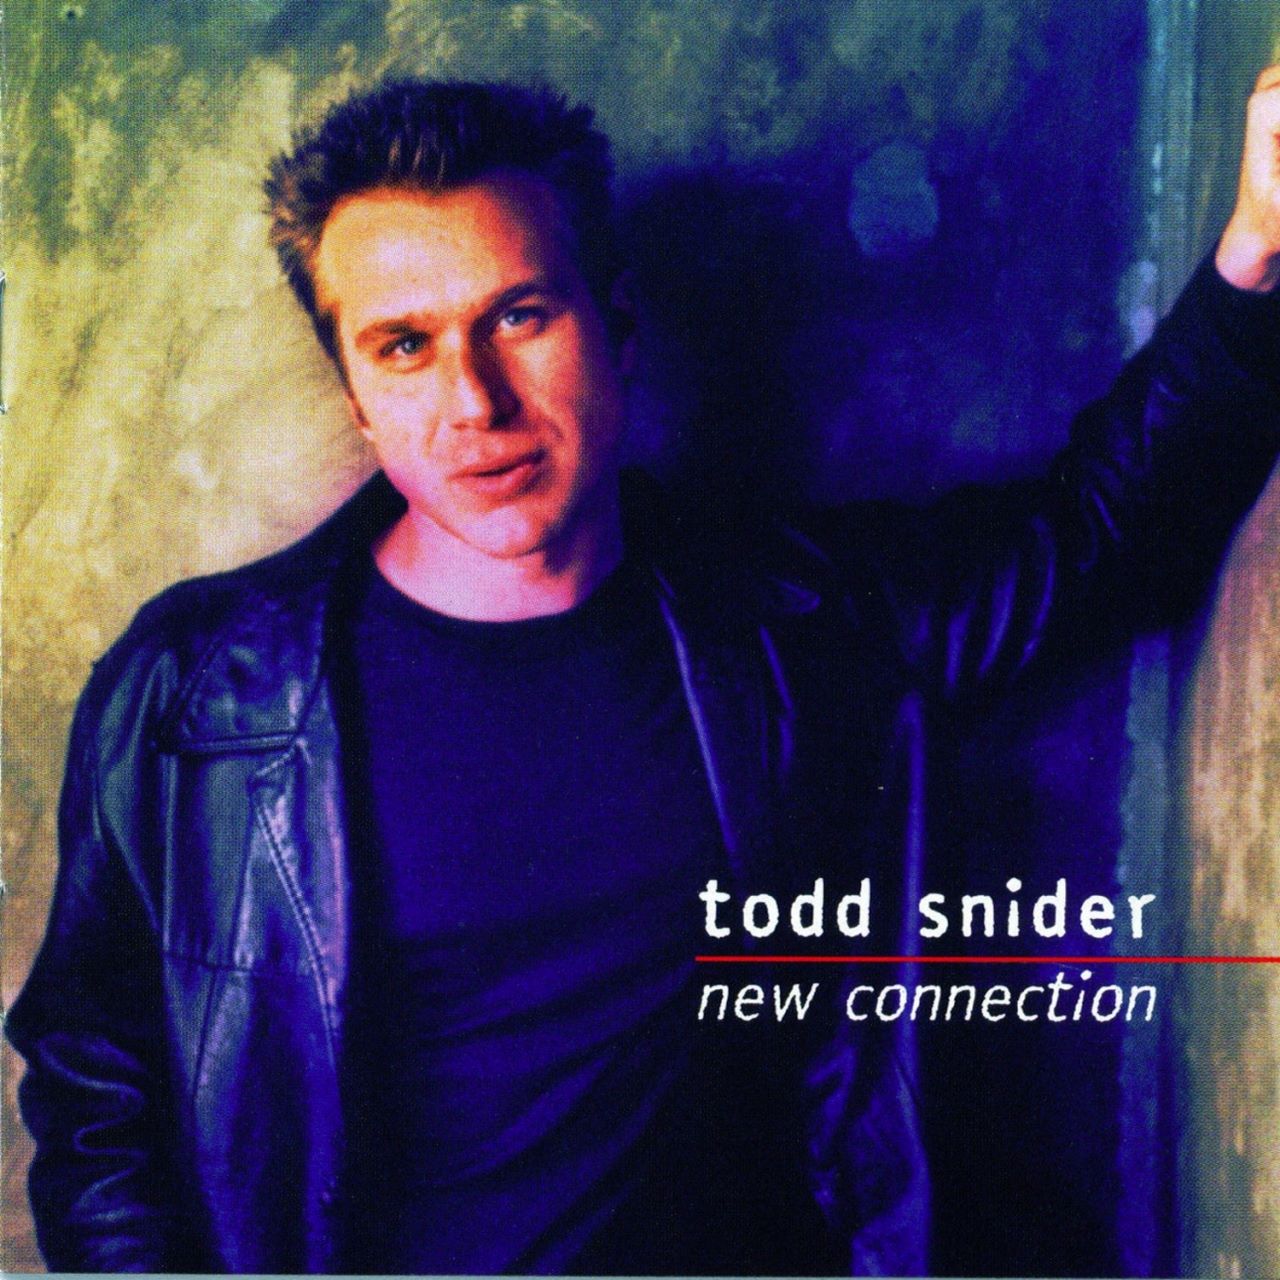 Todd Snider - New Connection cover album